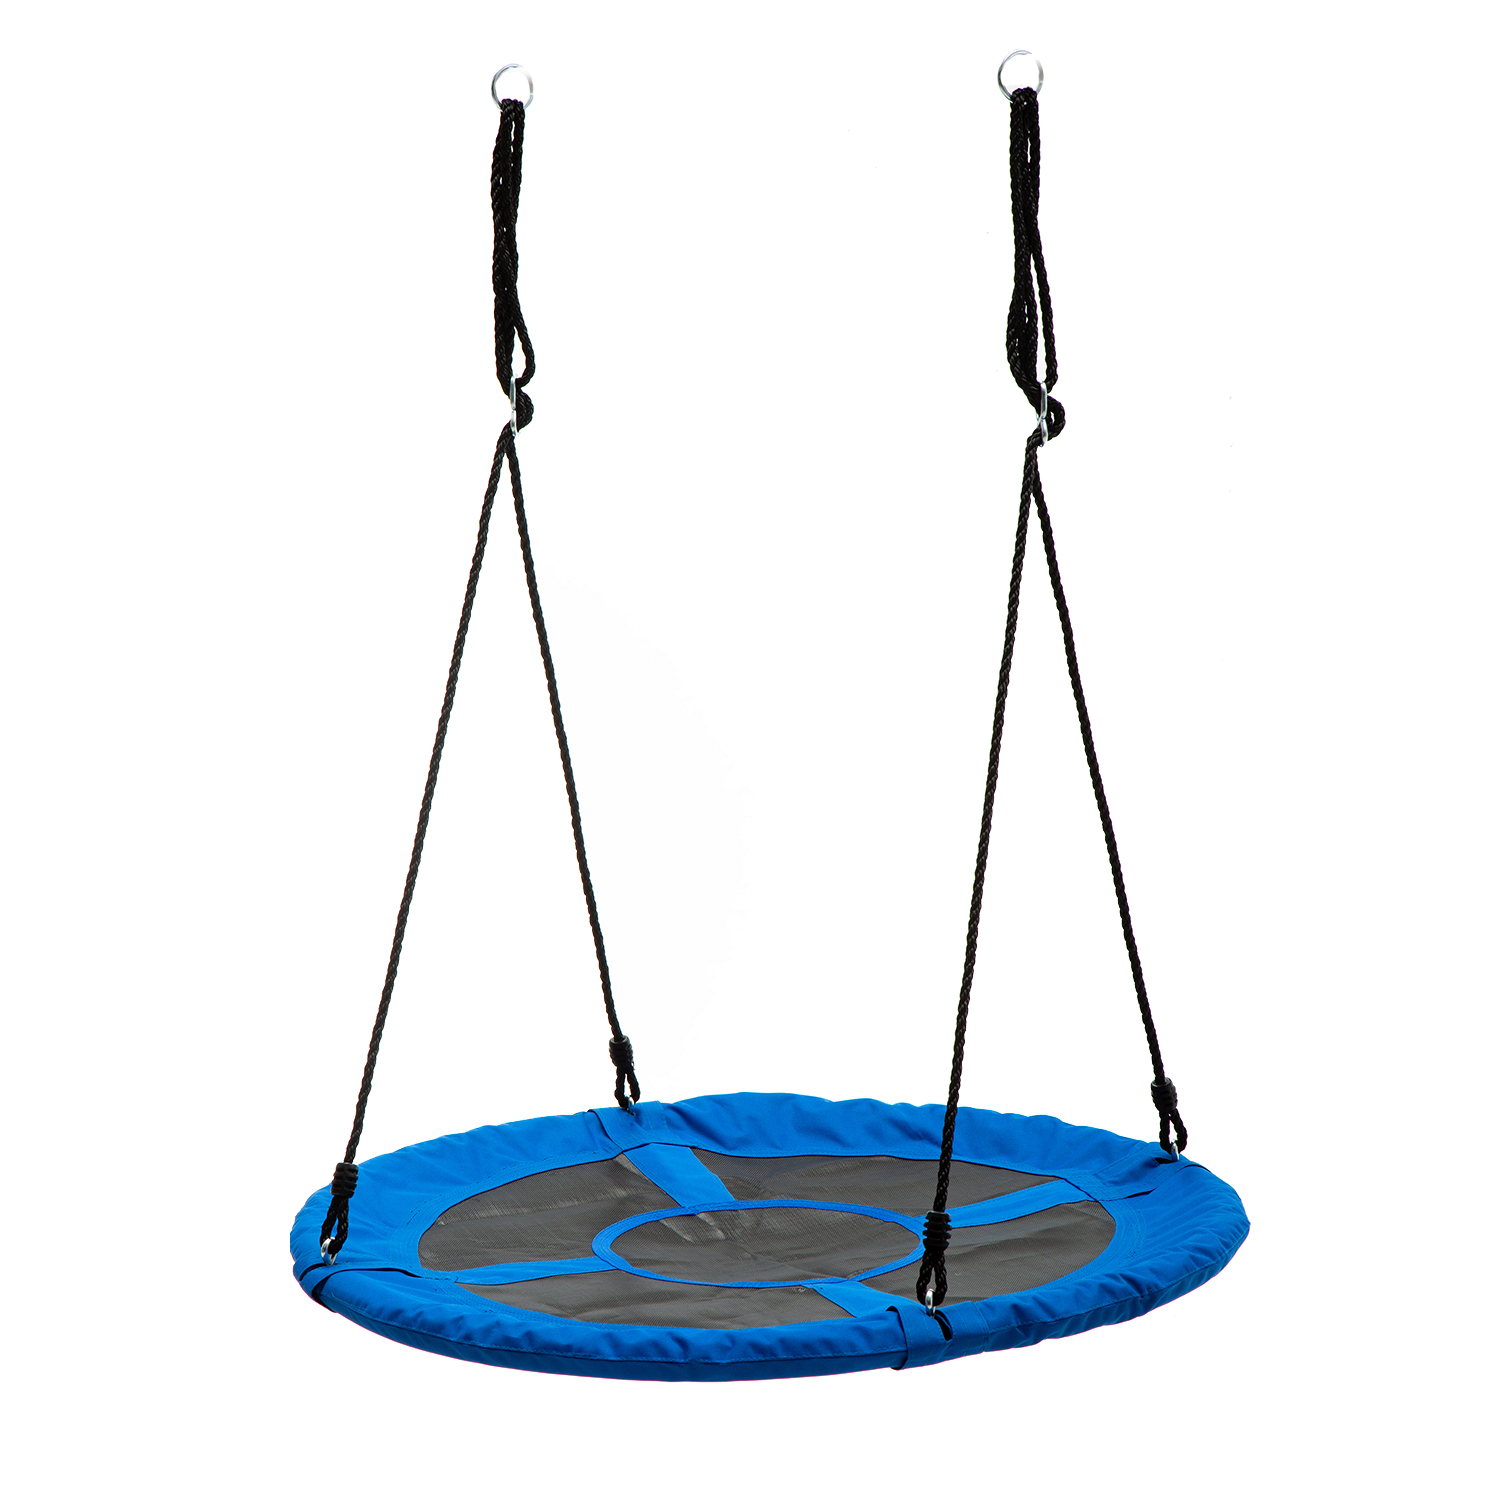 Walsport 40" Round Hanging Chair Swing Multi-seater Rainbow Platform Mat Indoor & Outdoor kids Flying Sky Swing Lounge Chair Park, Blue - image 4 of 14